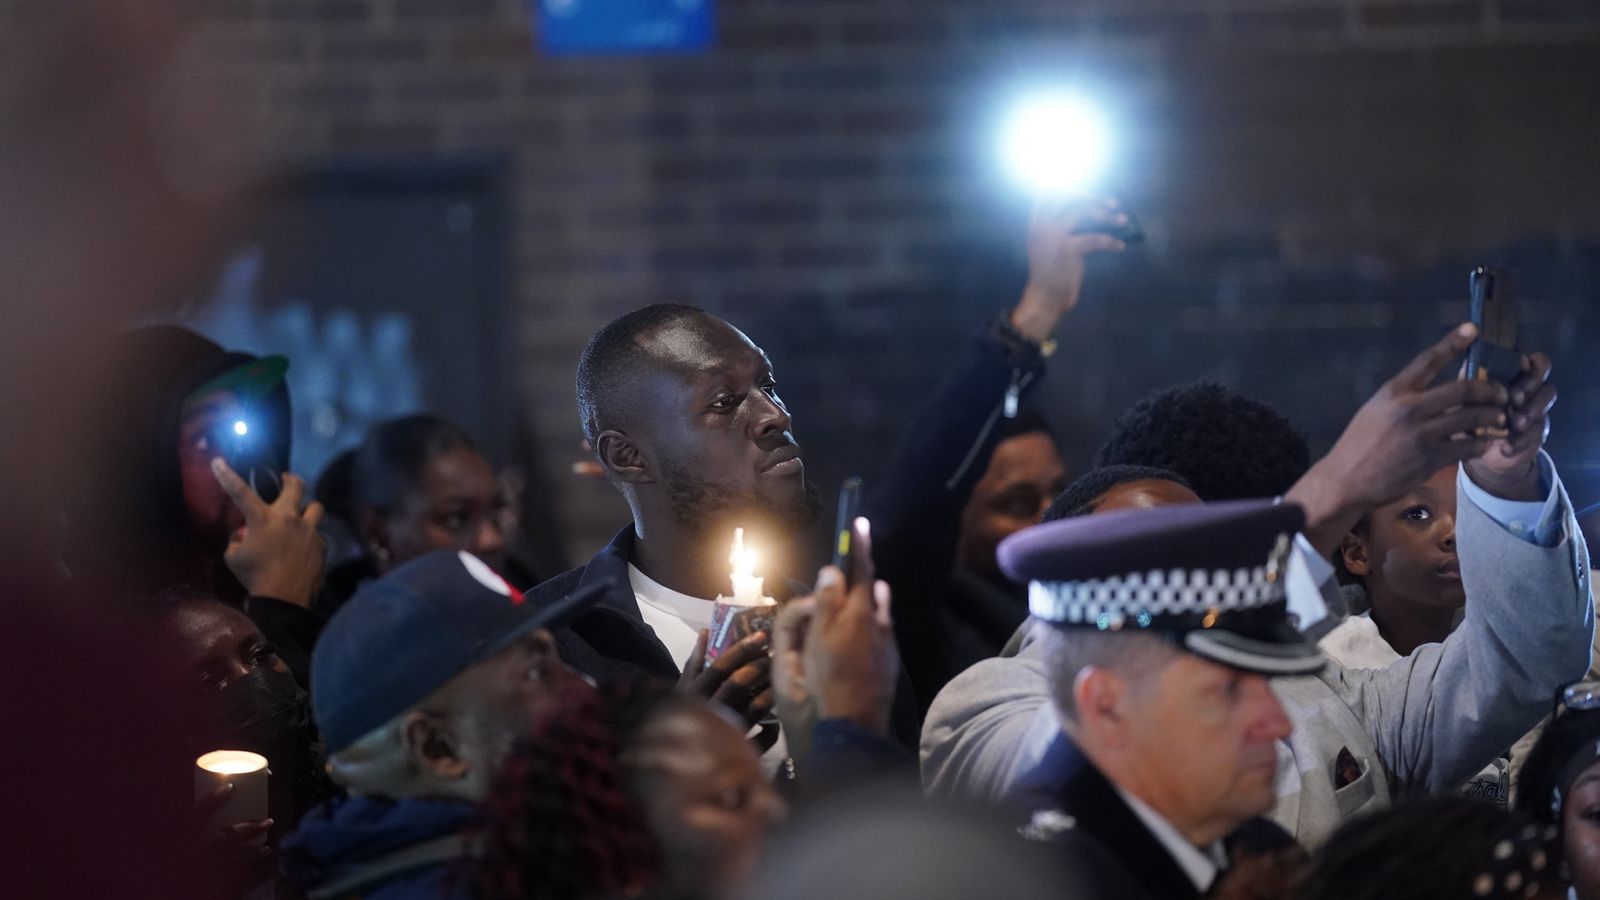 Elianne Andam: Stormzy joins mourners at candlelit vigil for 15-year-old stabbed in Croydon